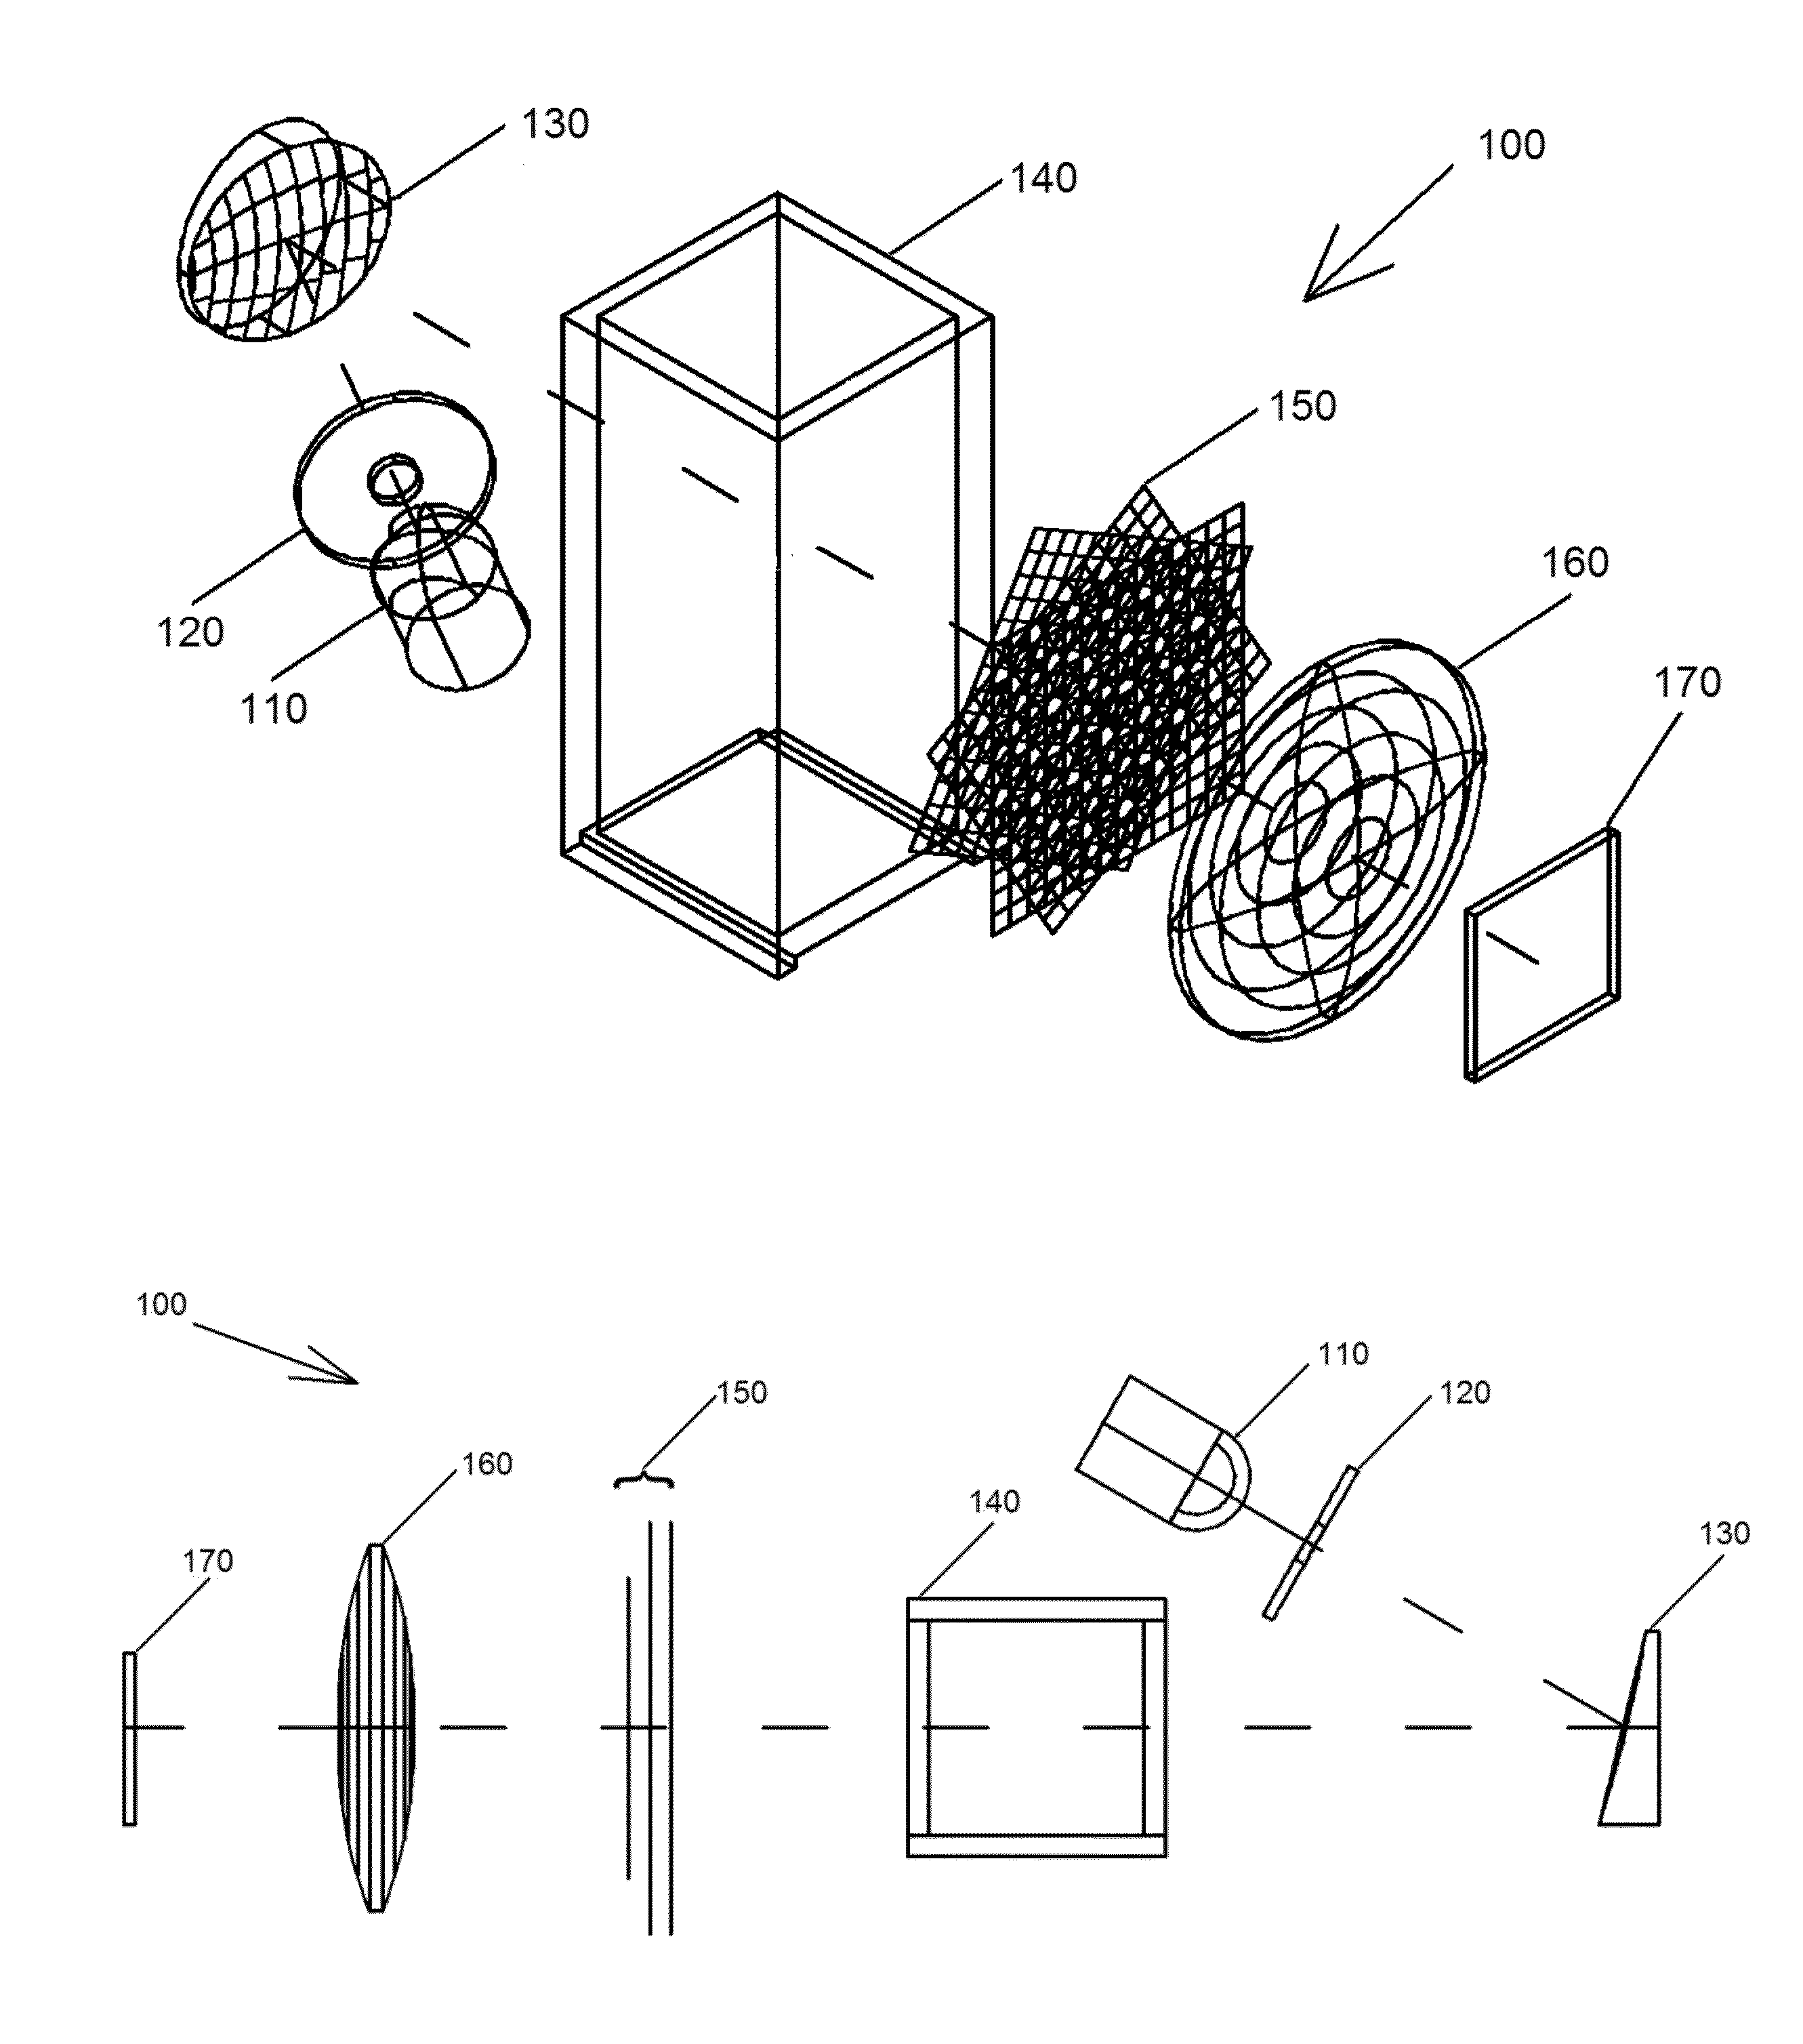 Energy dispersion device